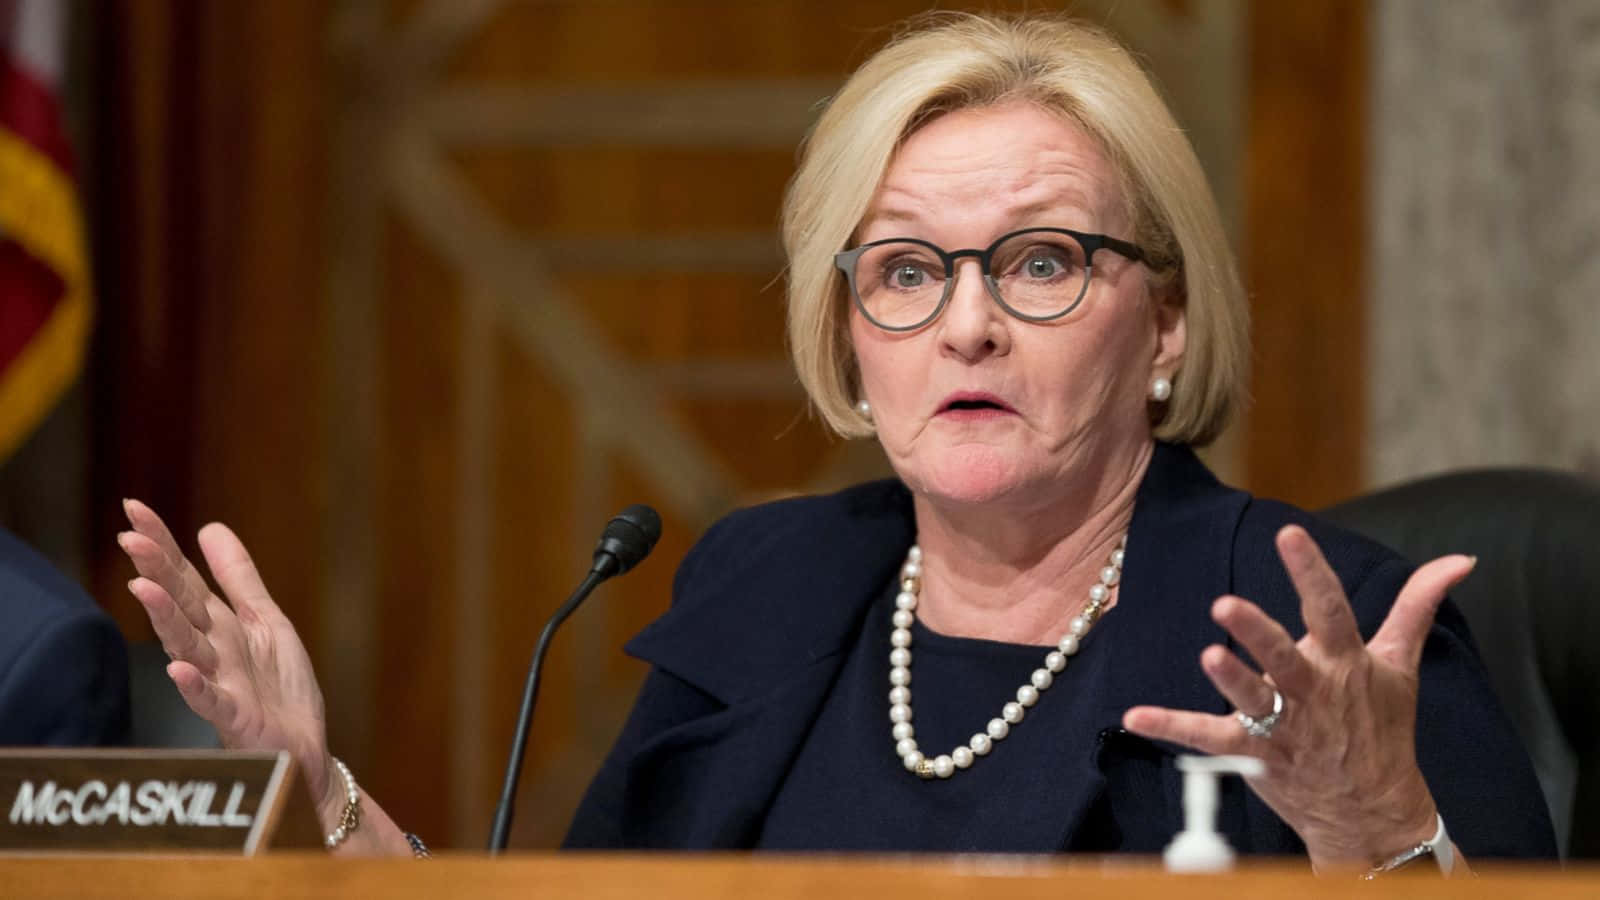 Claire Mccaskill With Open Palms Picture